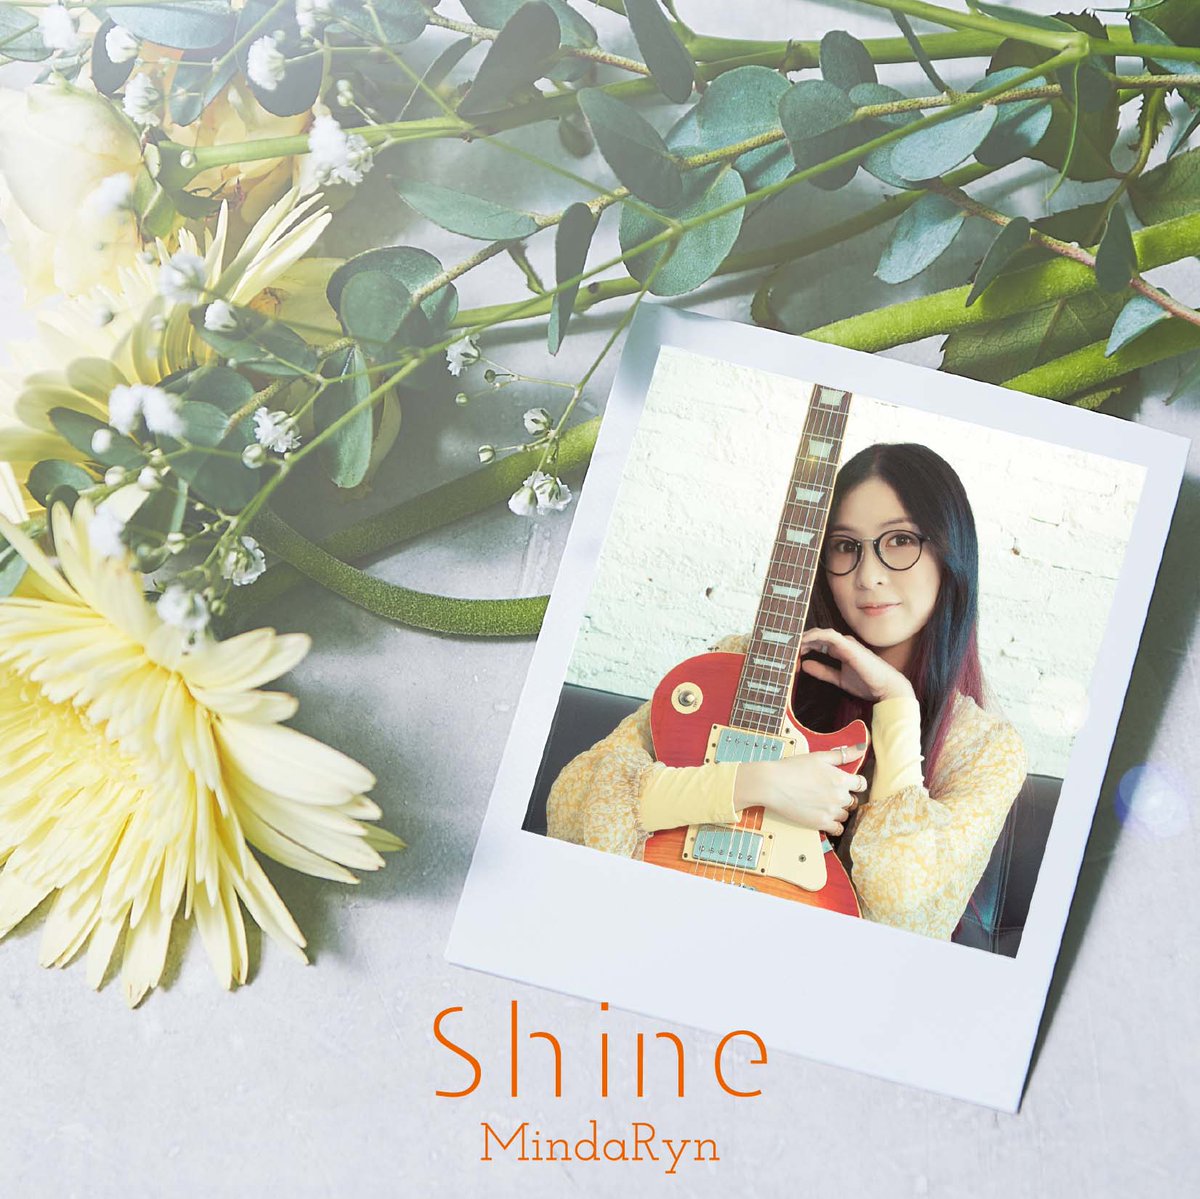 Cover for『MindaRyn - Because of you』from the release『Shine』